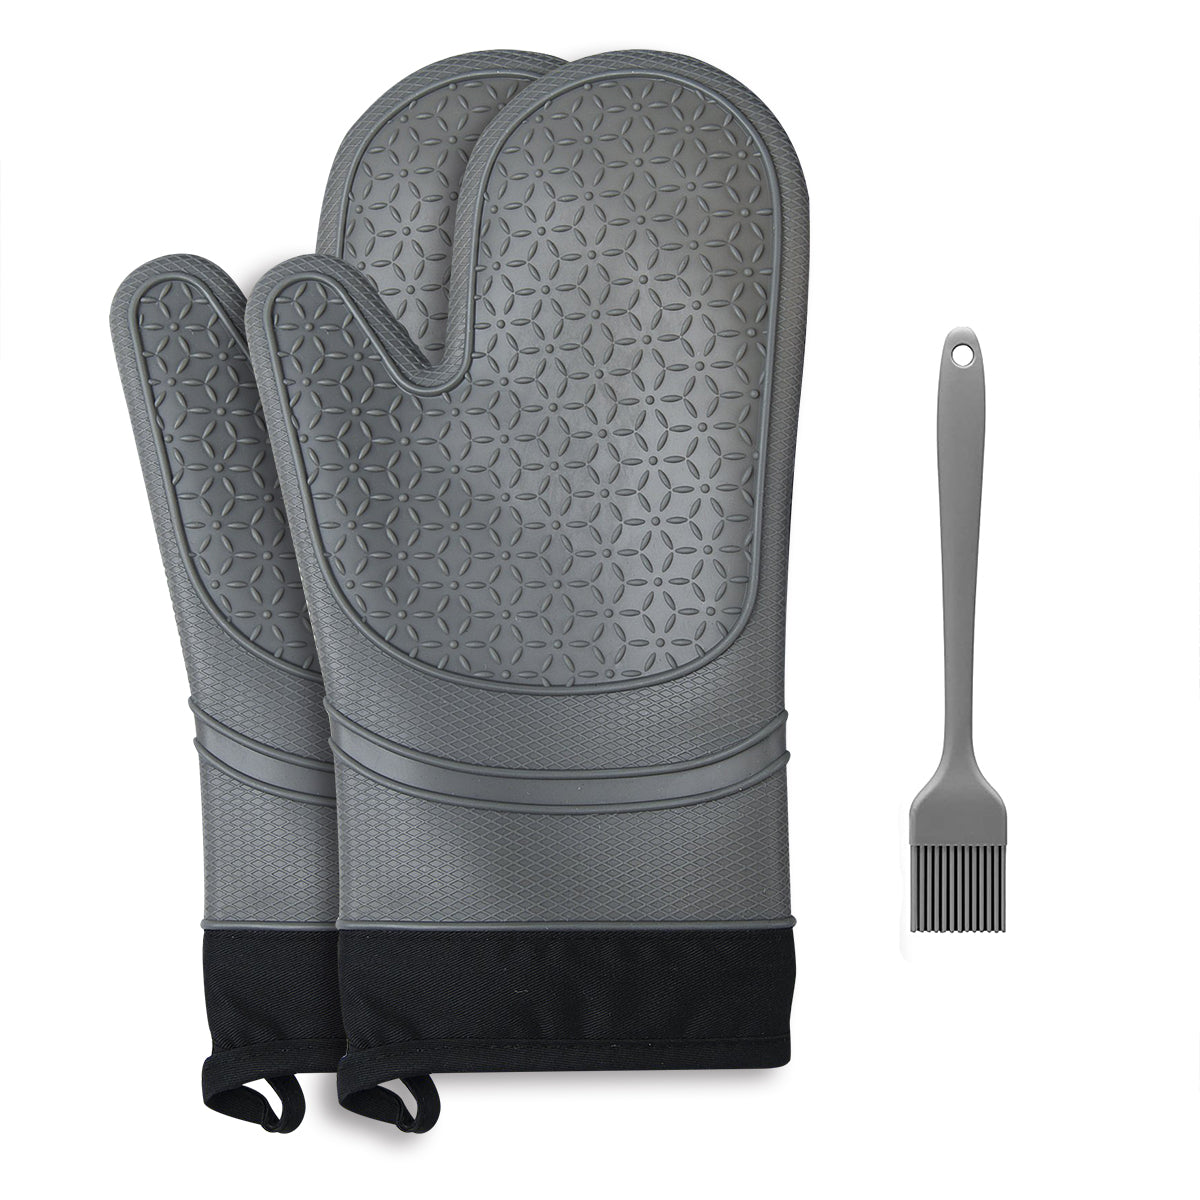 Buy 1 get 1 FREE - One Pair Silicone Oven Gloves with Mini Oven